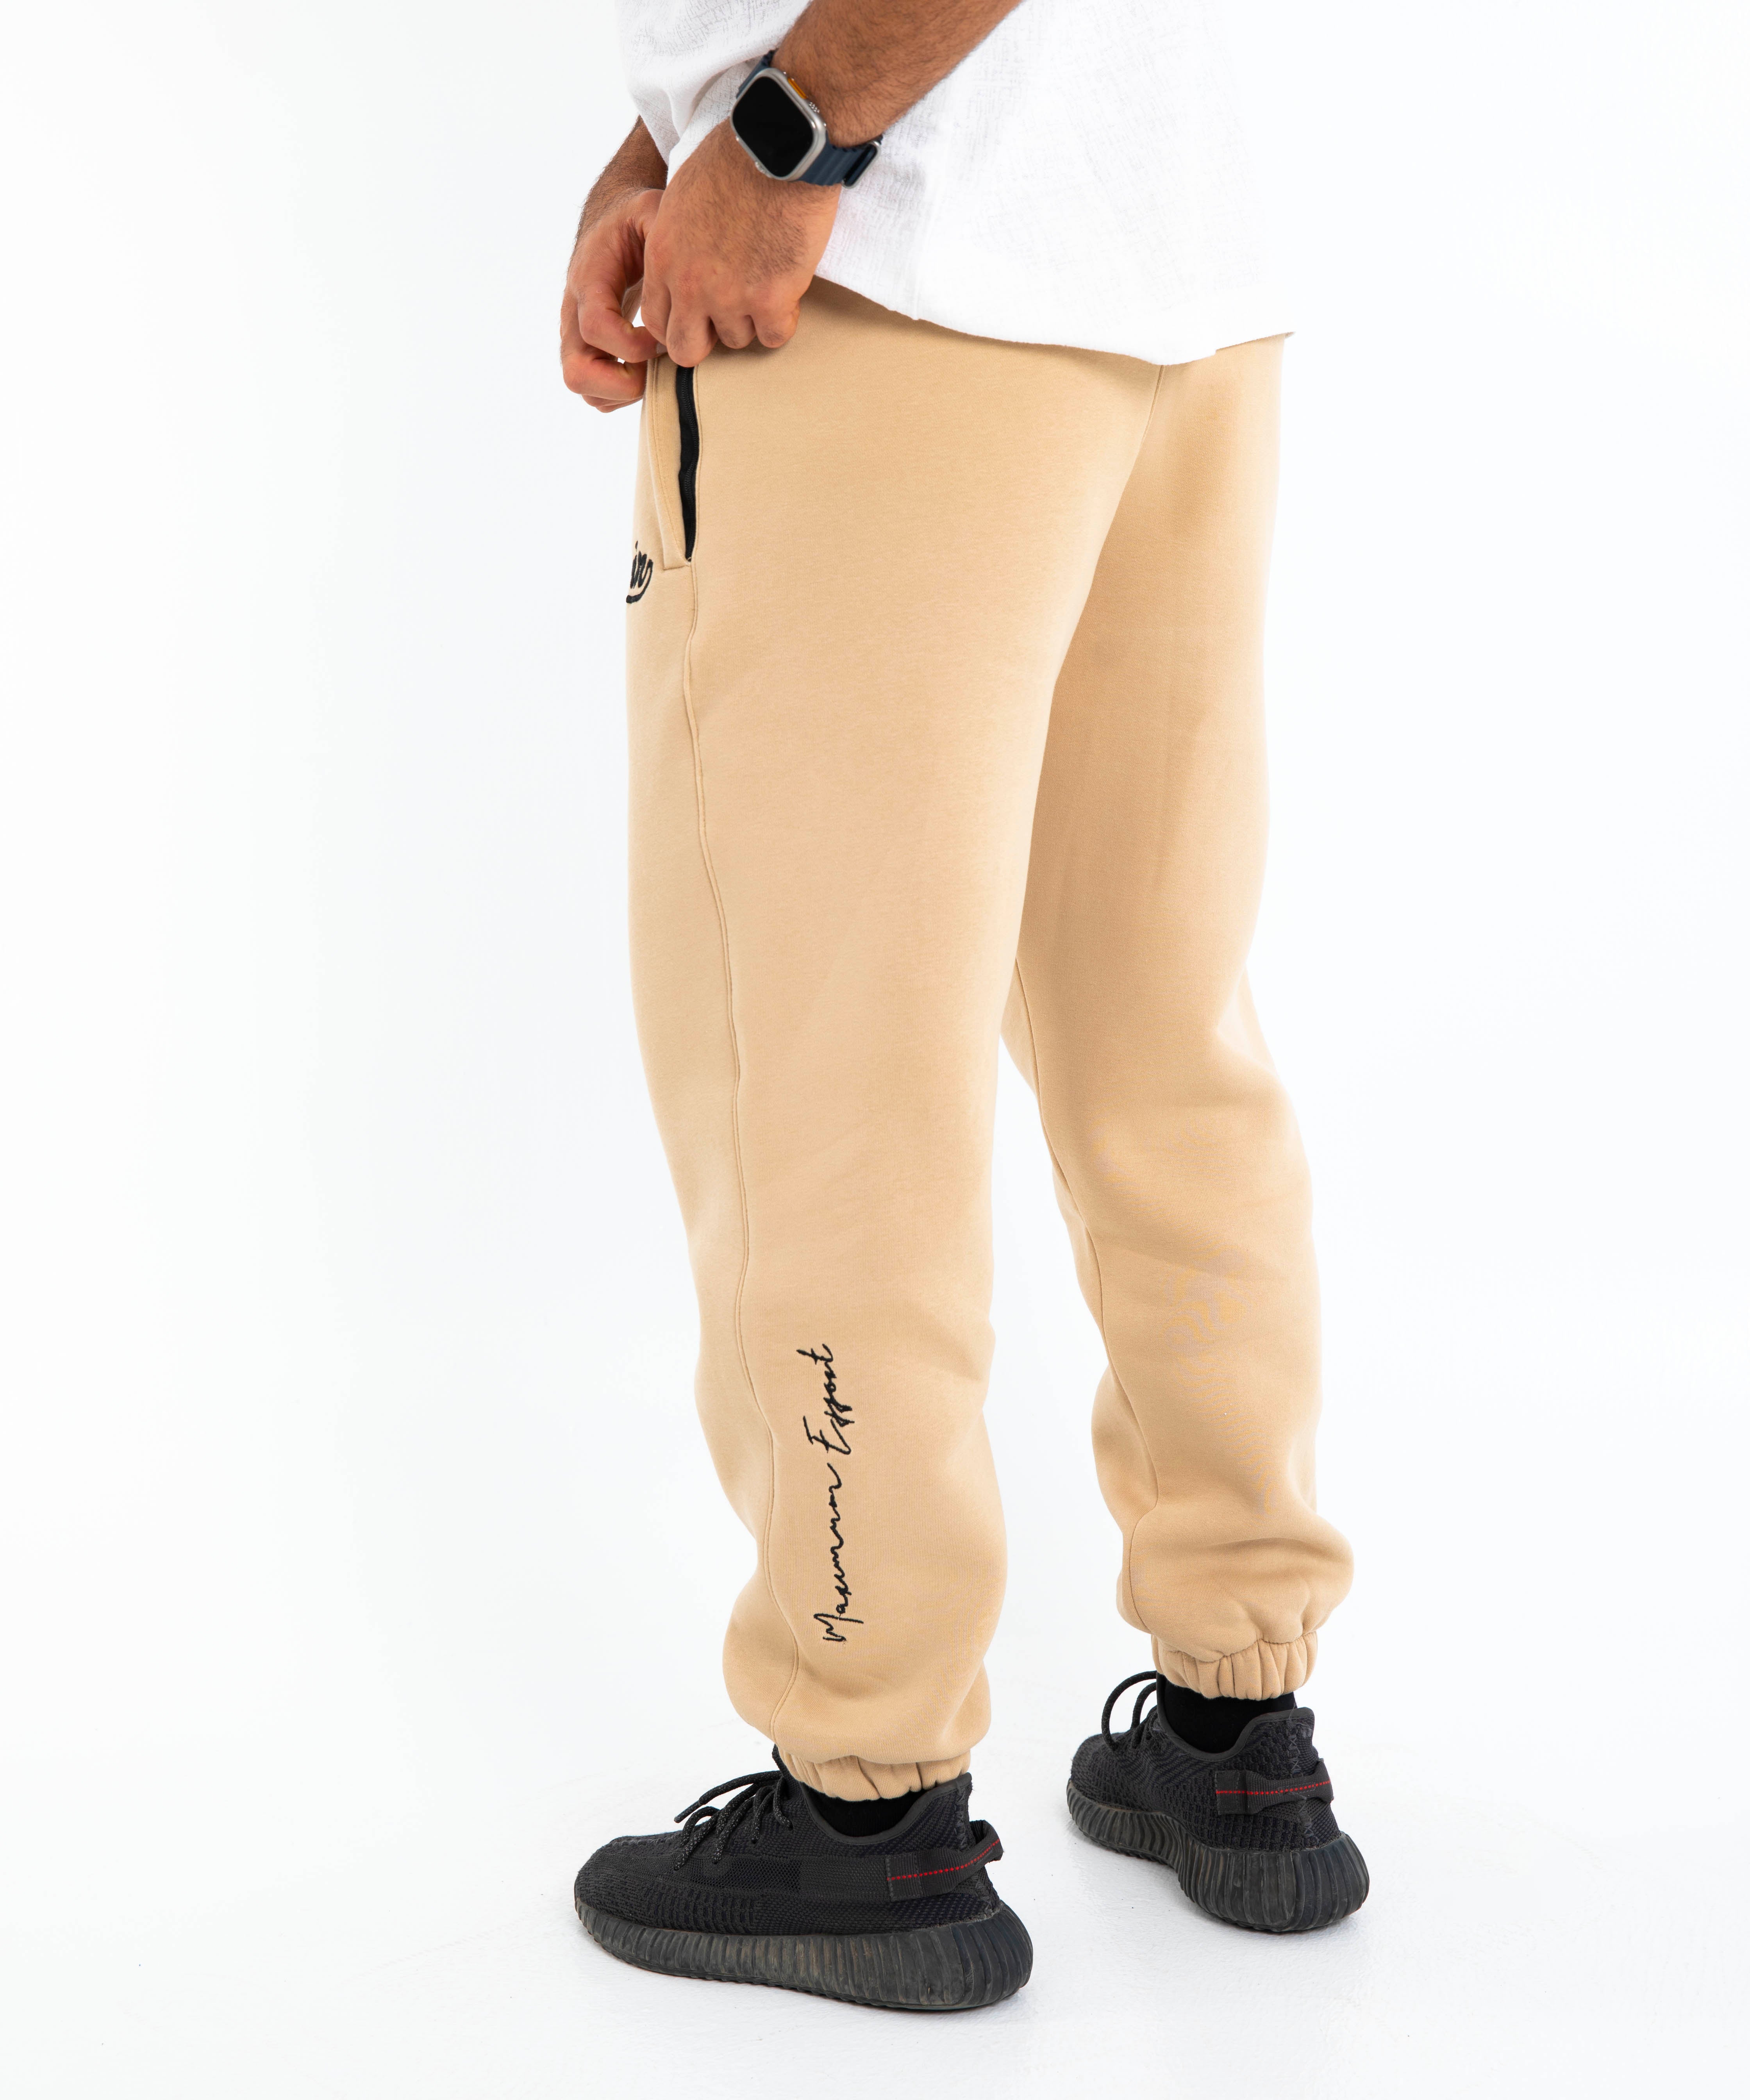 "SOFT TOUCH JOGGERS" UNISEX